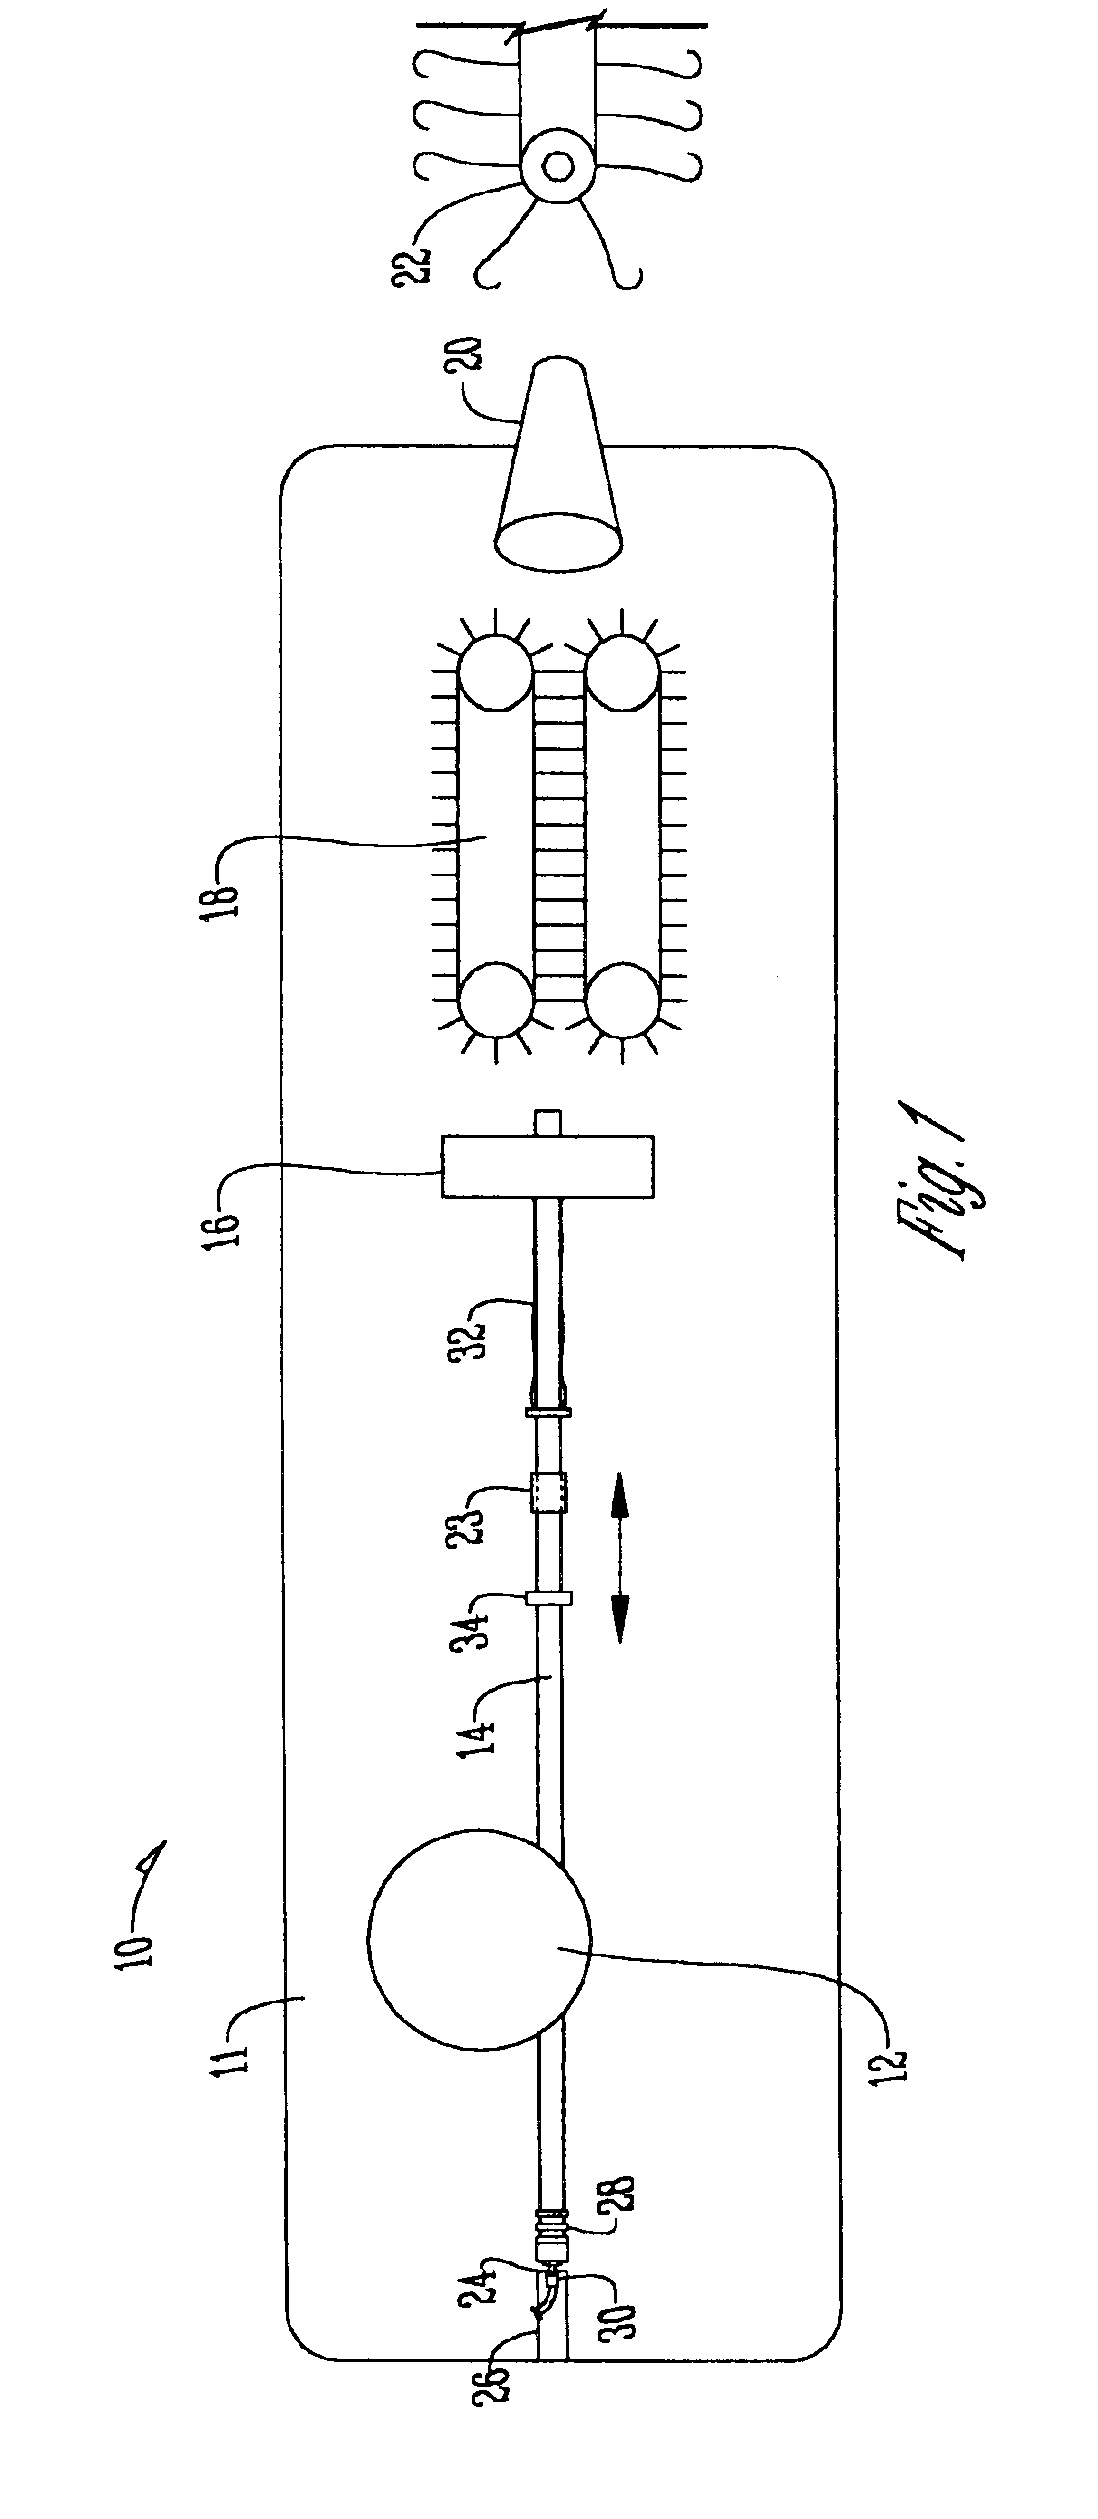 Method and means for advancing a sausage casing using fluid power